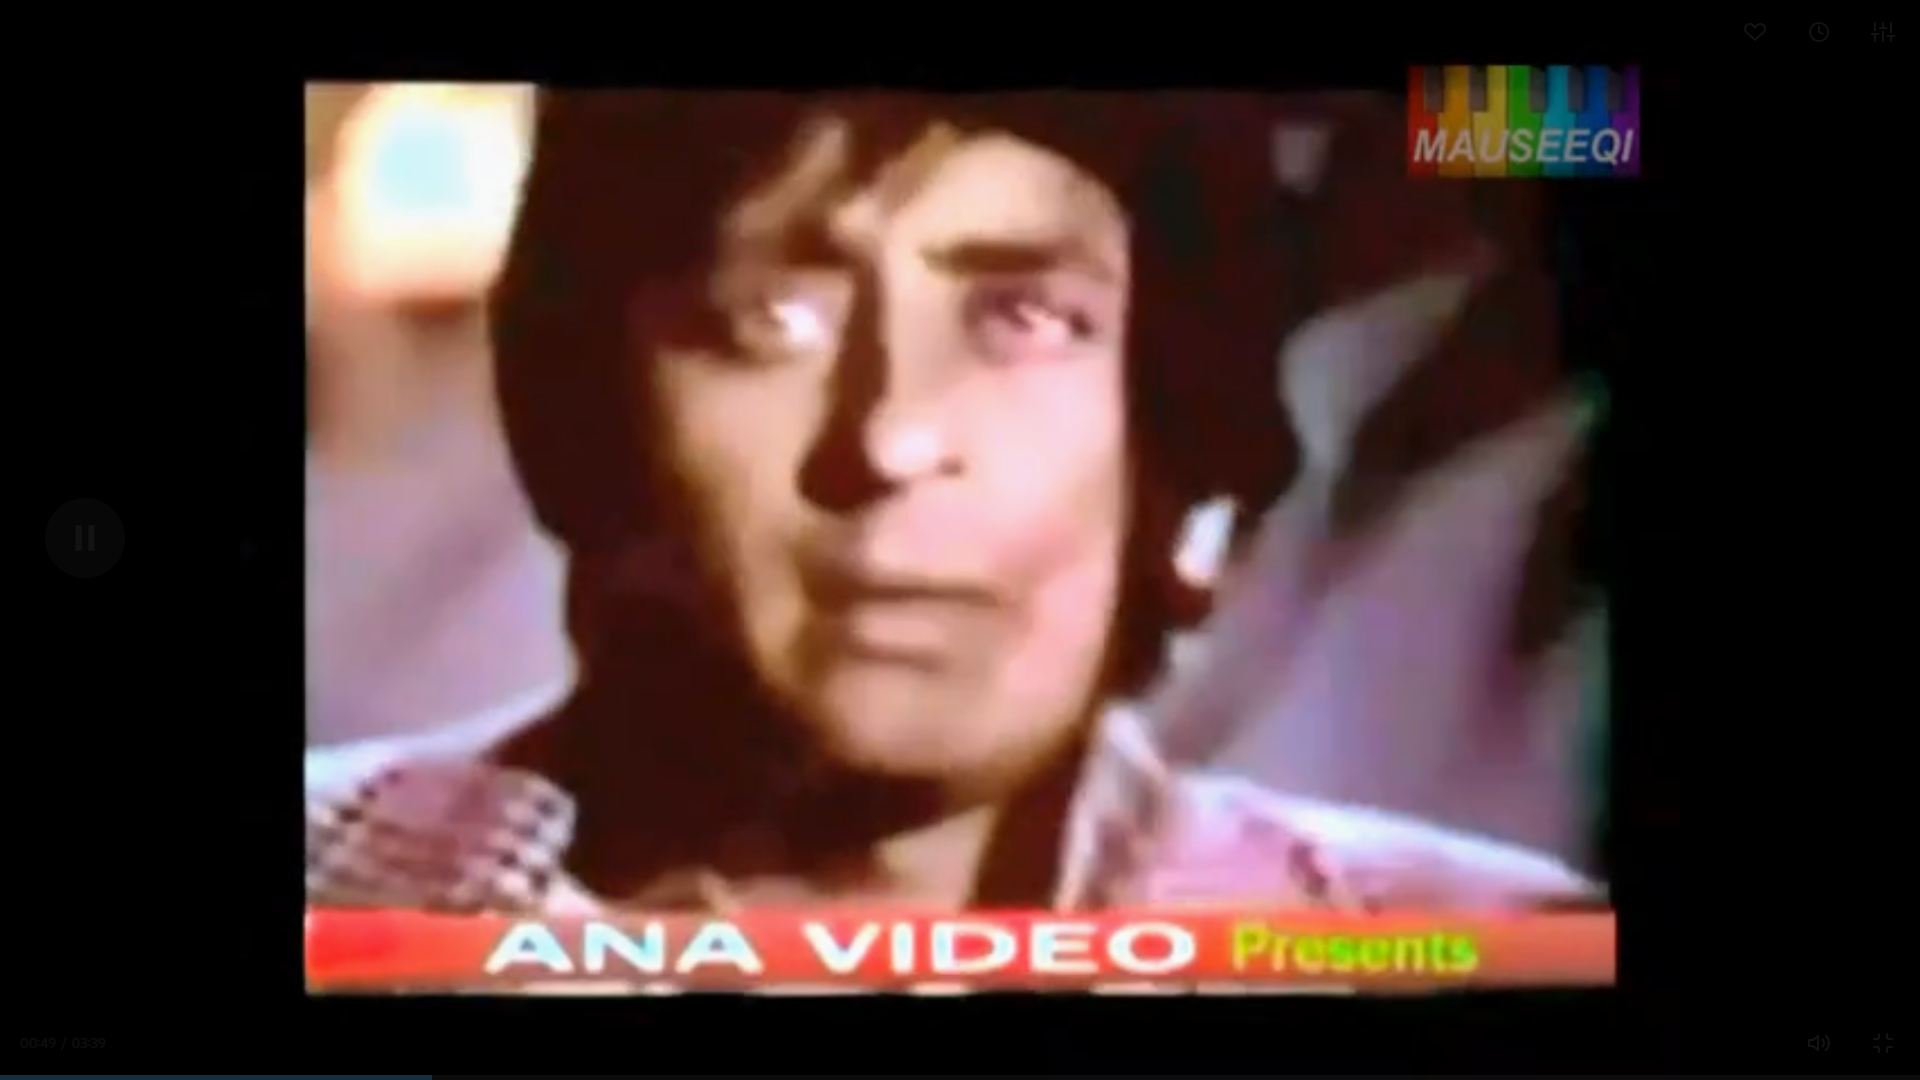 A screenshot of a Pakistani actor; the video quality is low; in the top right corner is a rainbow piano logo 'mauseequi;' across the bottom is a banner reading 'Ana Video Presents'